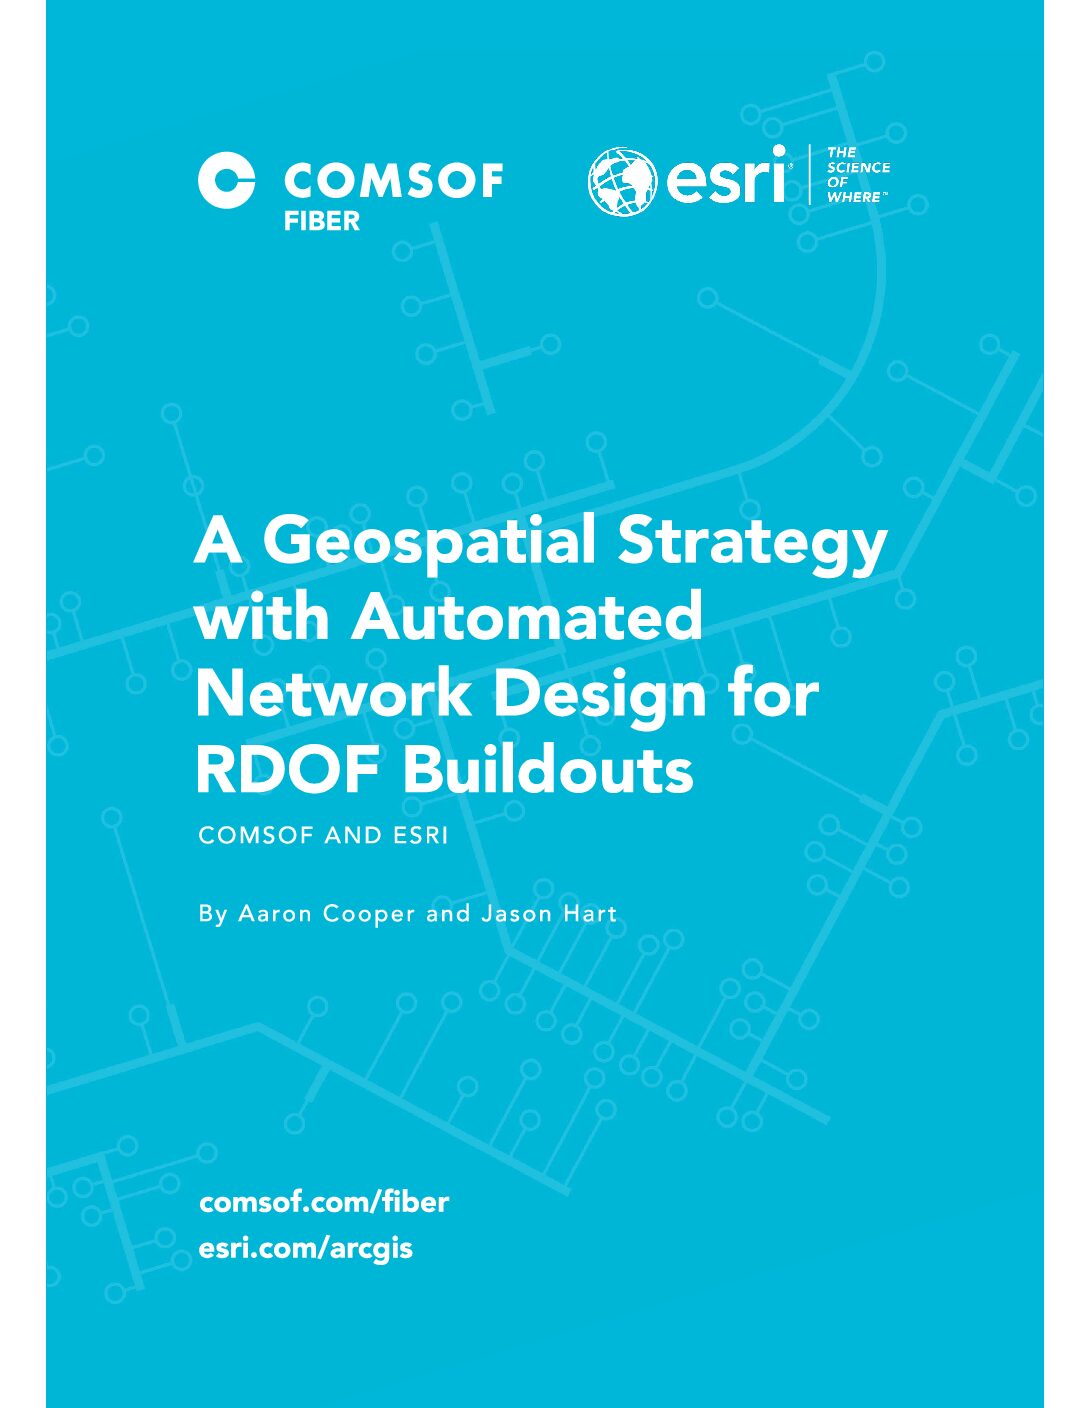 A-Geospatial-Strategy-with-Automated-Network-Design-for-RDOF-Buildouts-cover-pdf